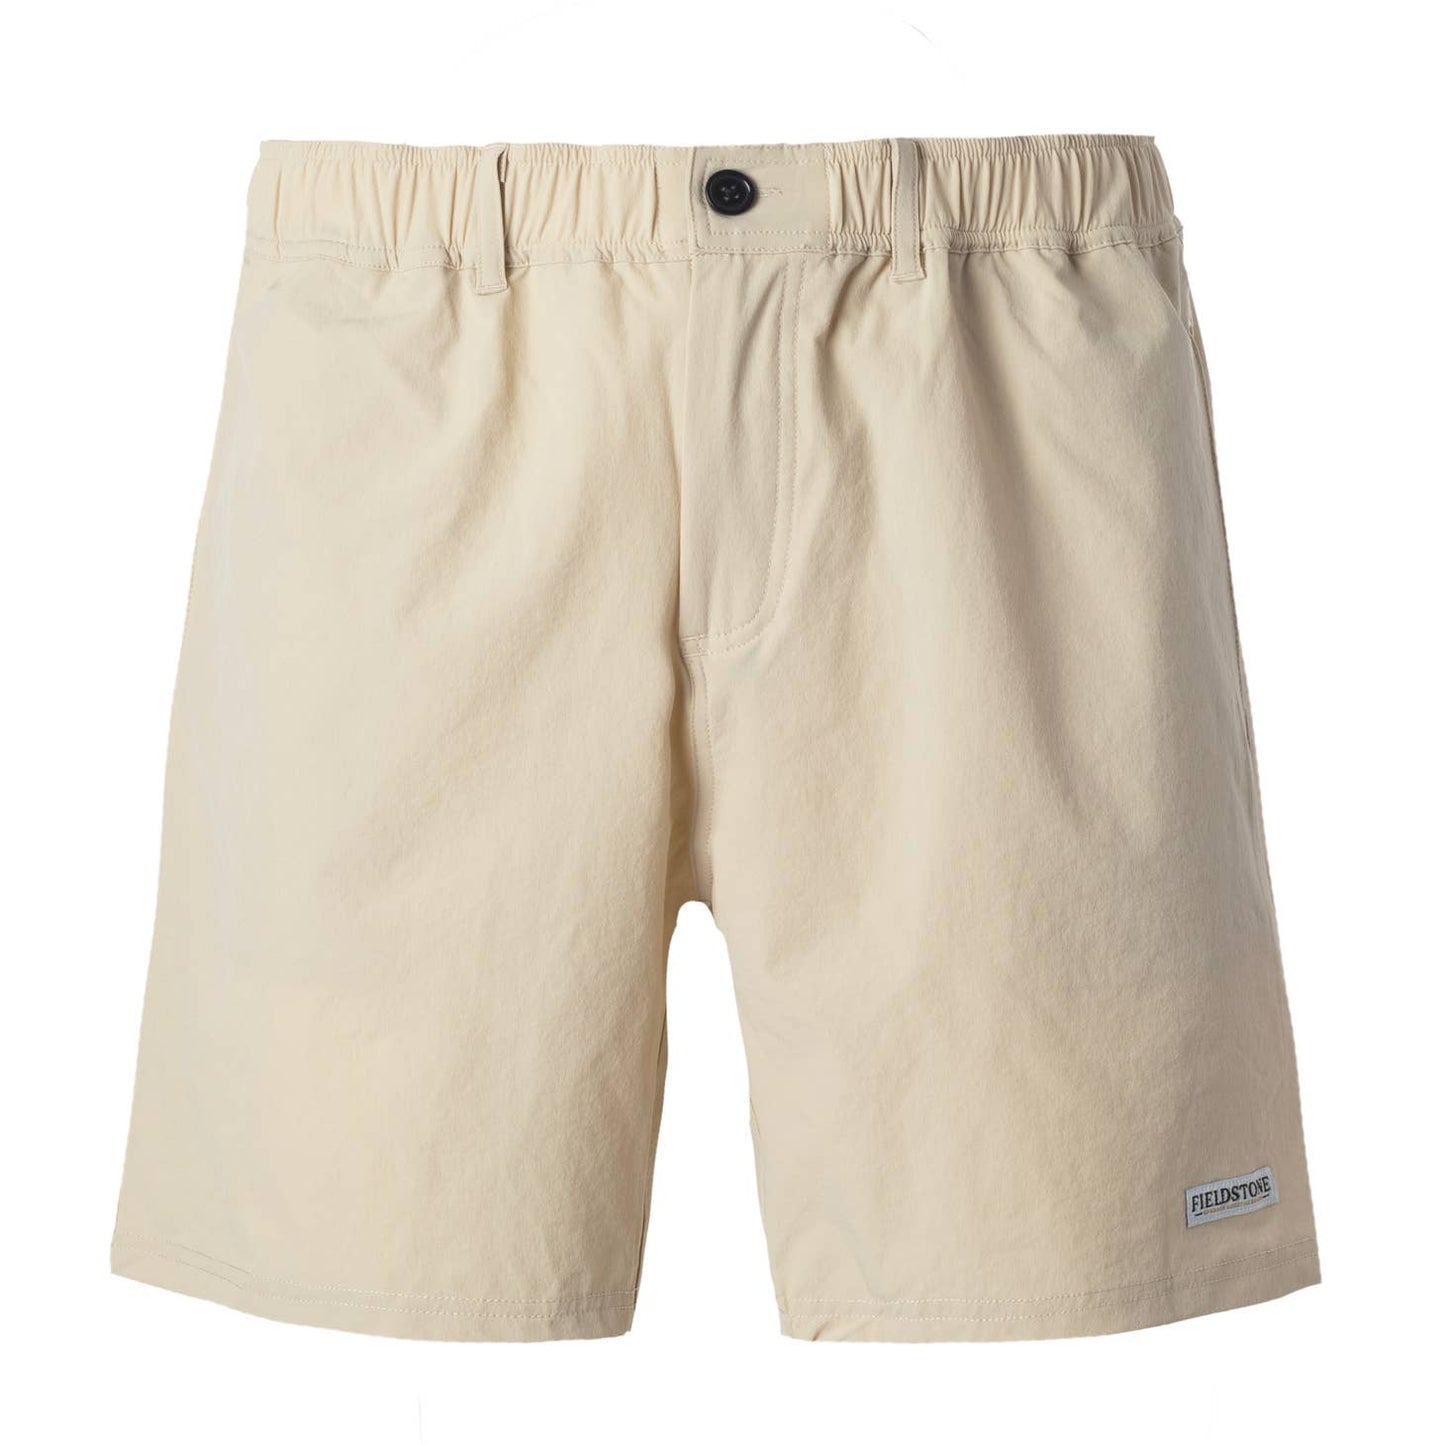 A pair of Fieldstone Outdoor Provisions Co. Rambler Shorts with a button on the side.